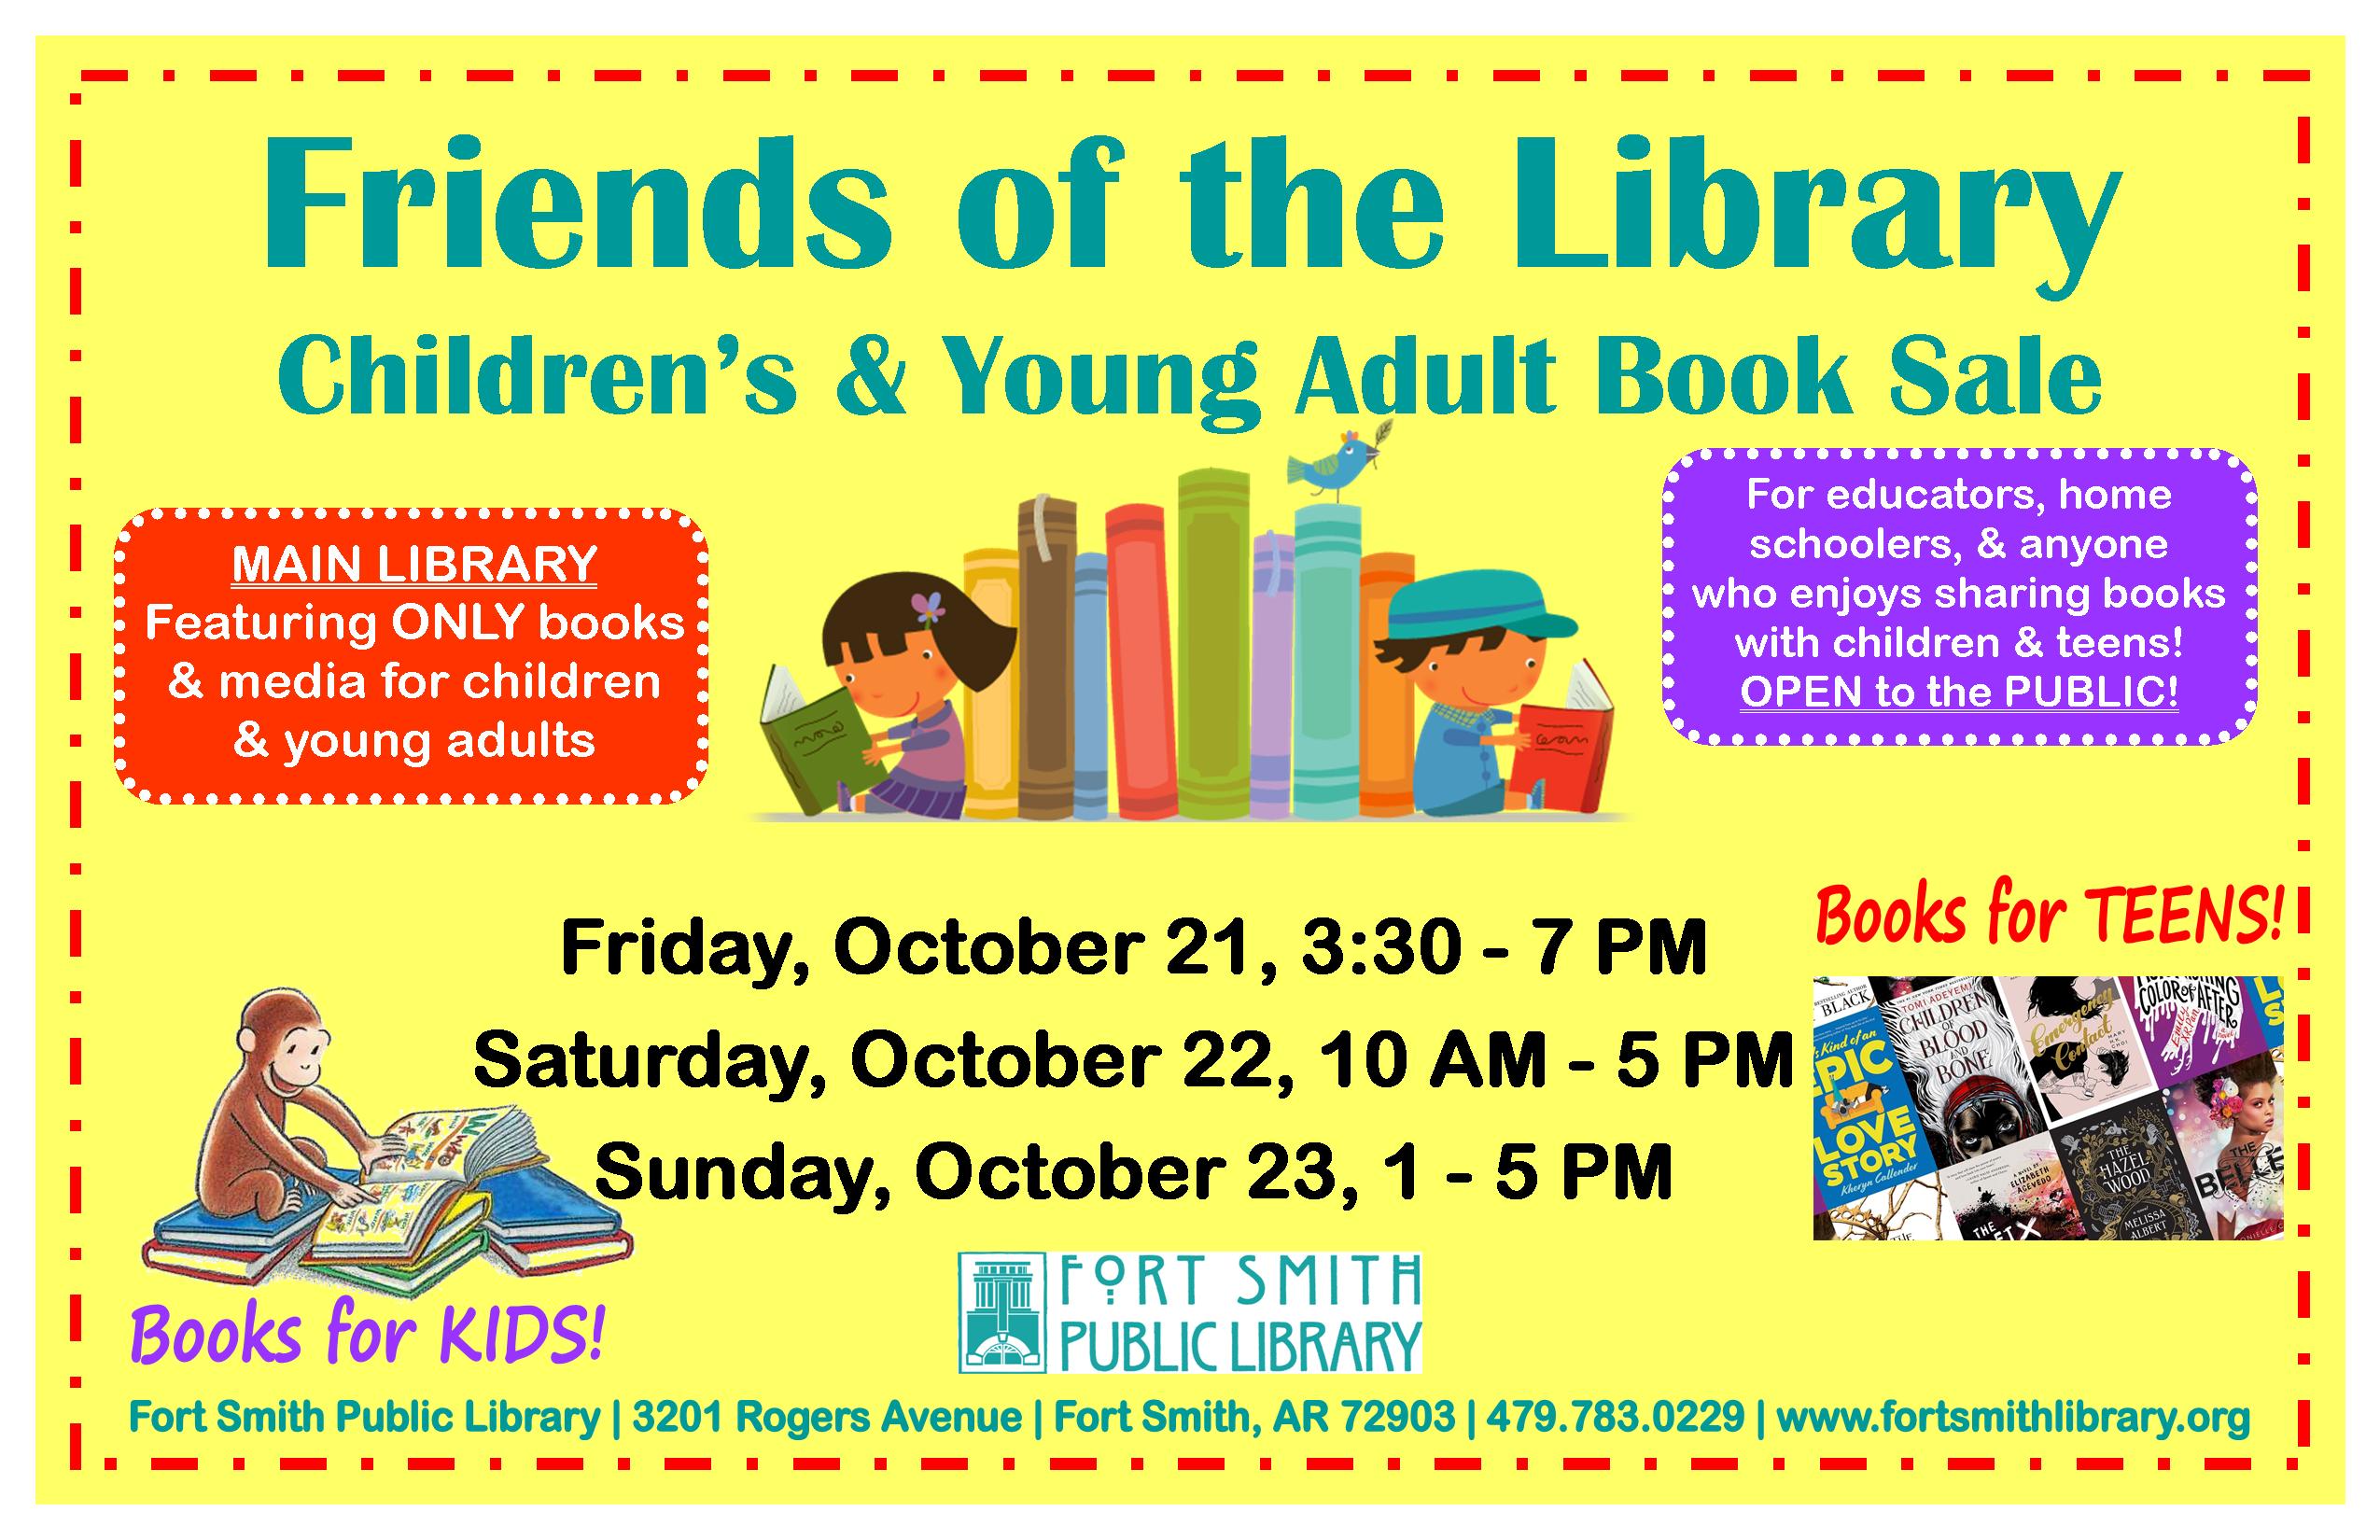 poster with children's book sale dates